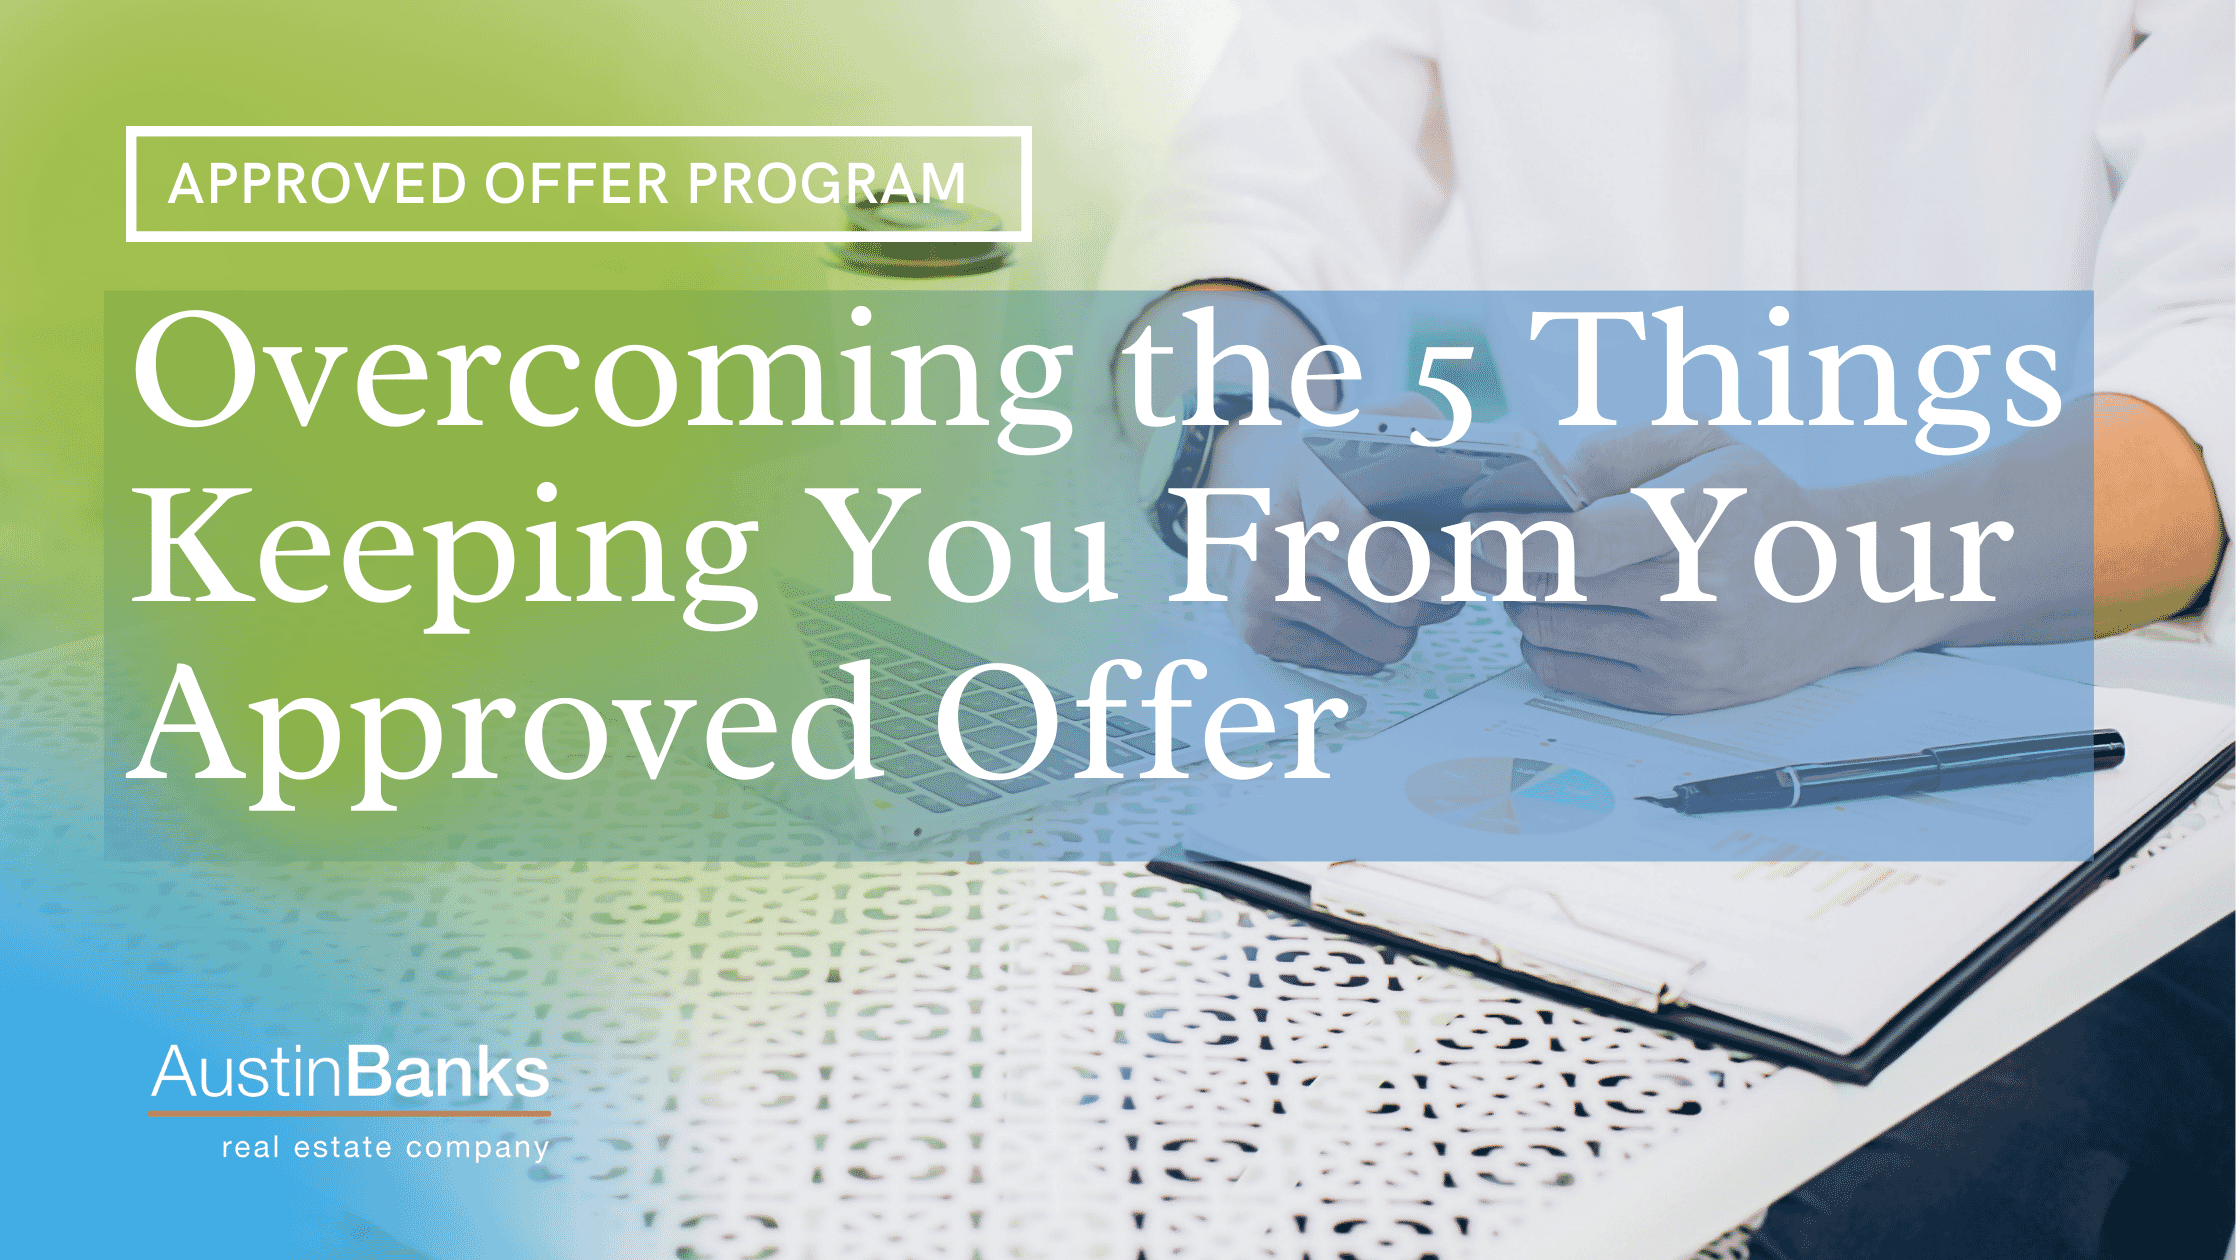 Overcoming the 5 Things Keeping You From Your Approved Offer